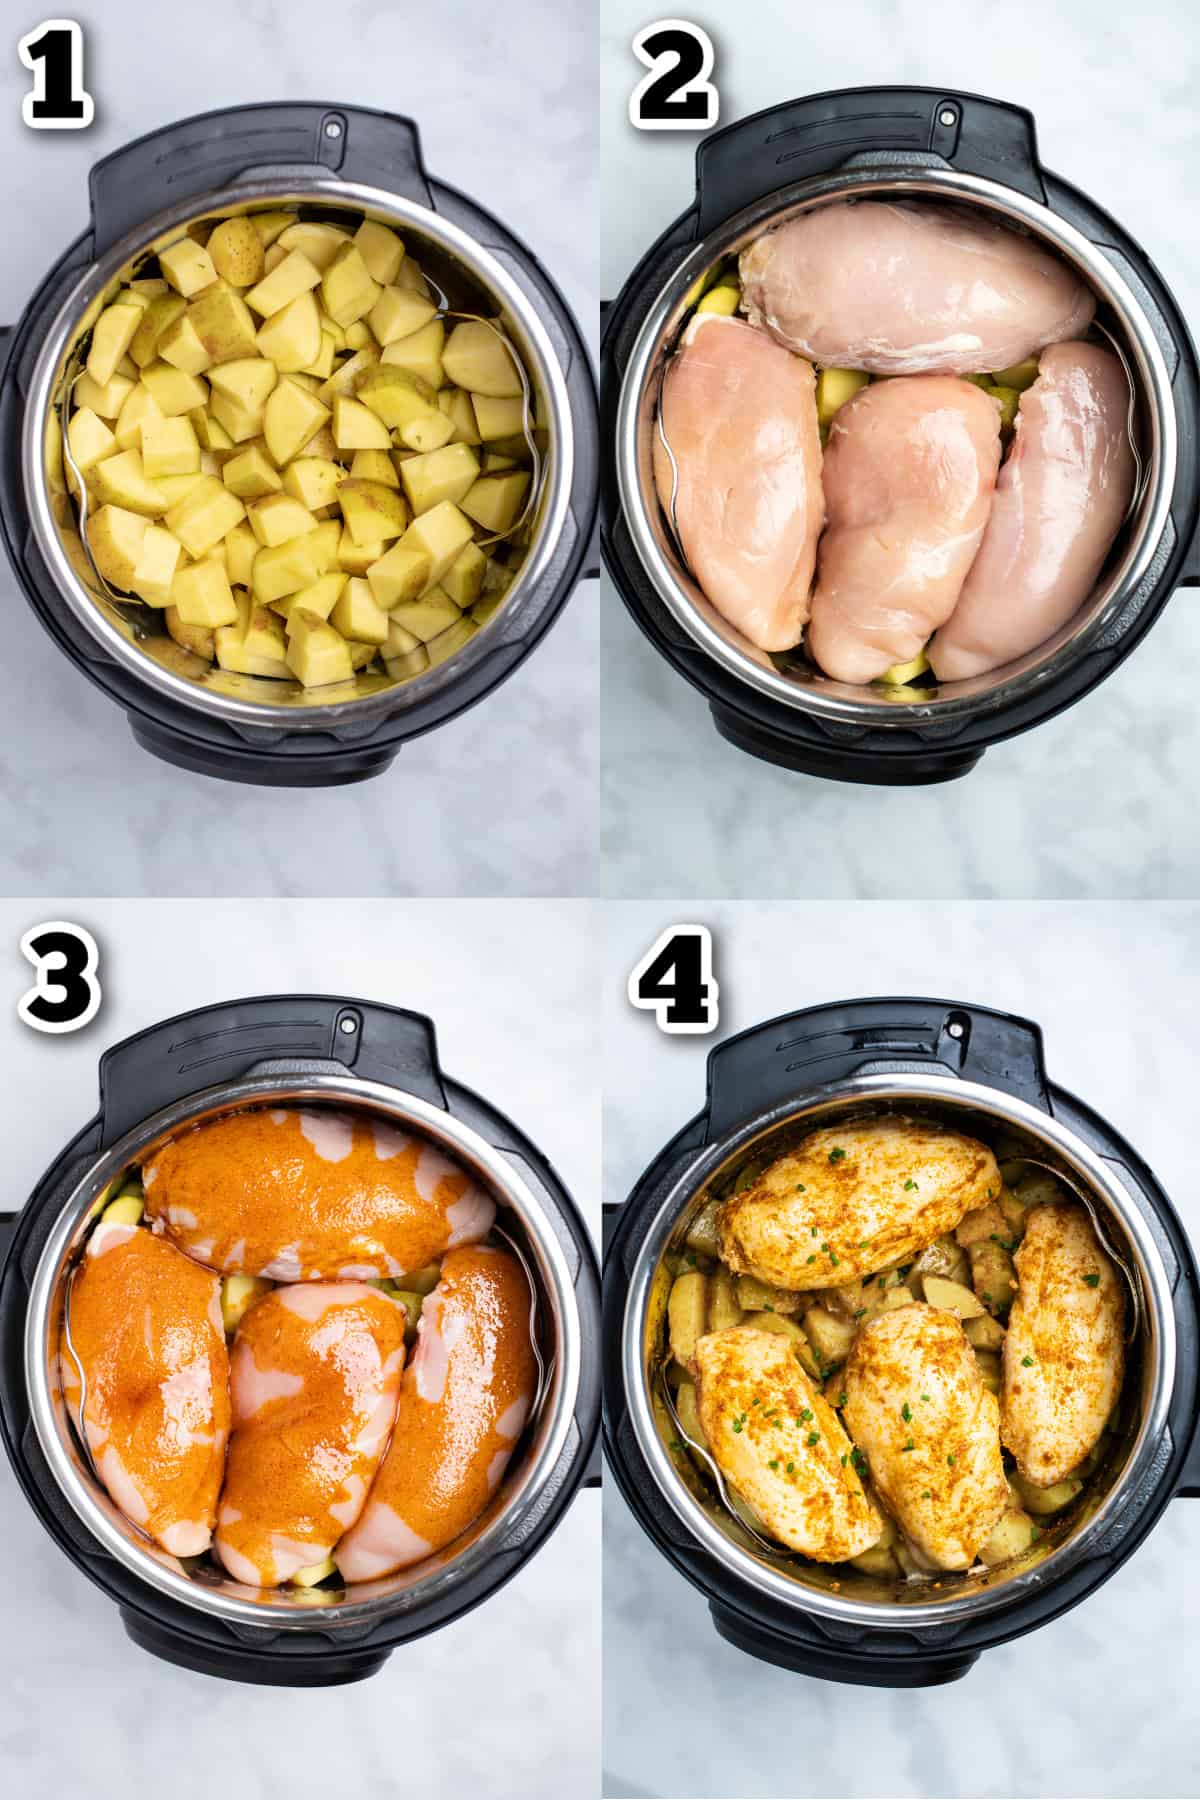 Step by step instructions for how to make instant pot chicken and potatoes.